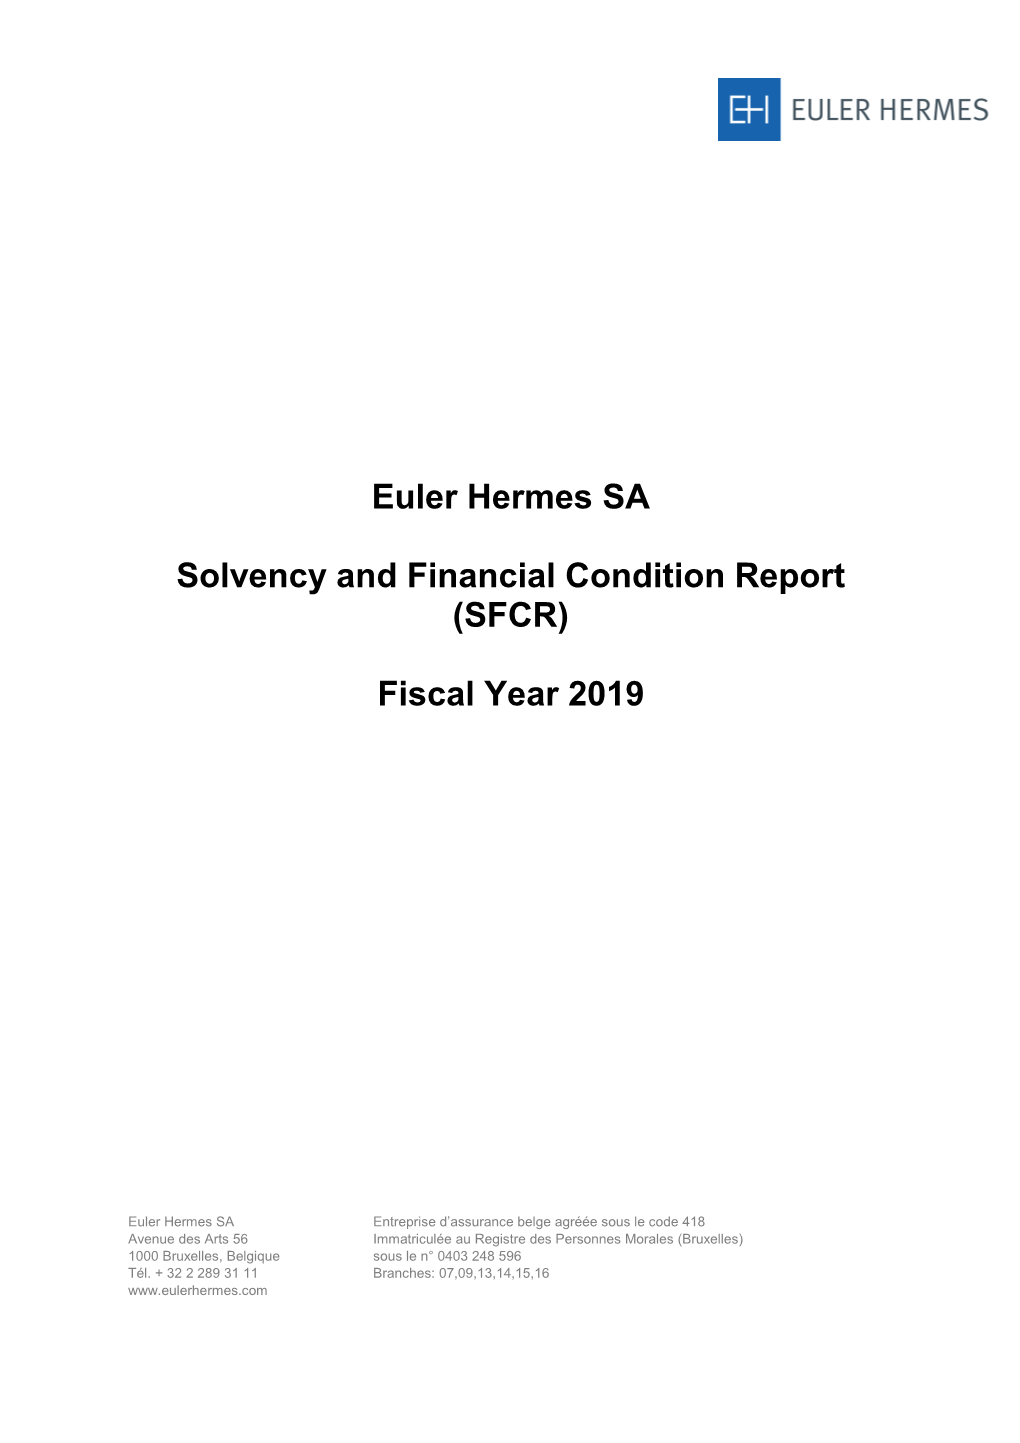 Euler Hermes SA Solvency and Financial Condition Report (SFCR)